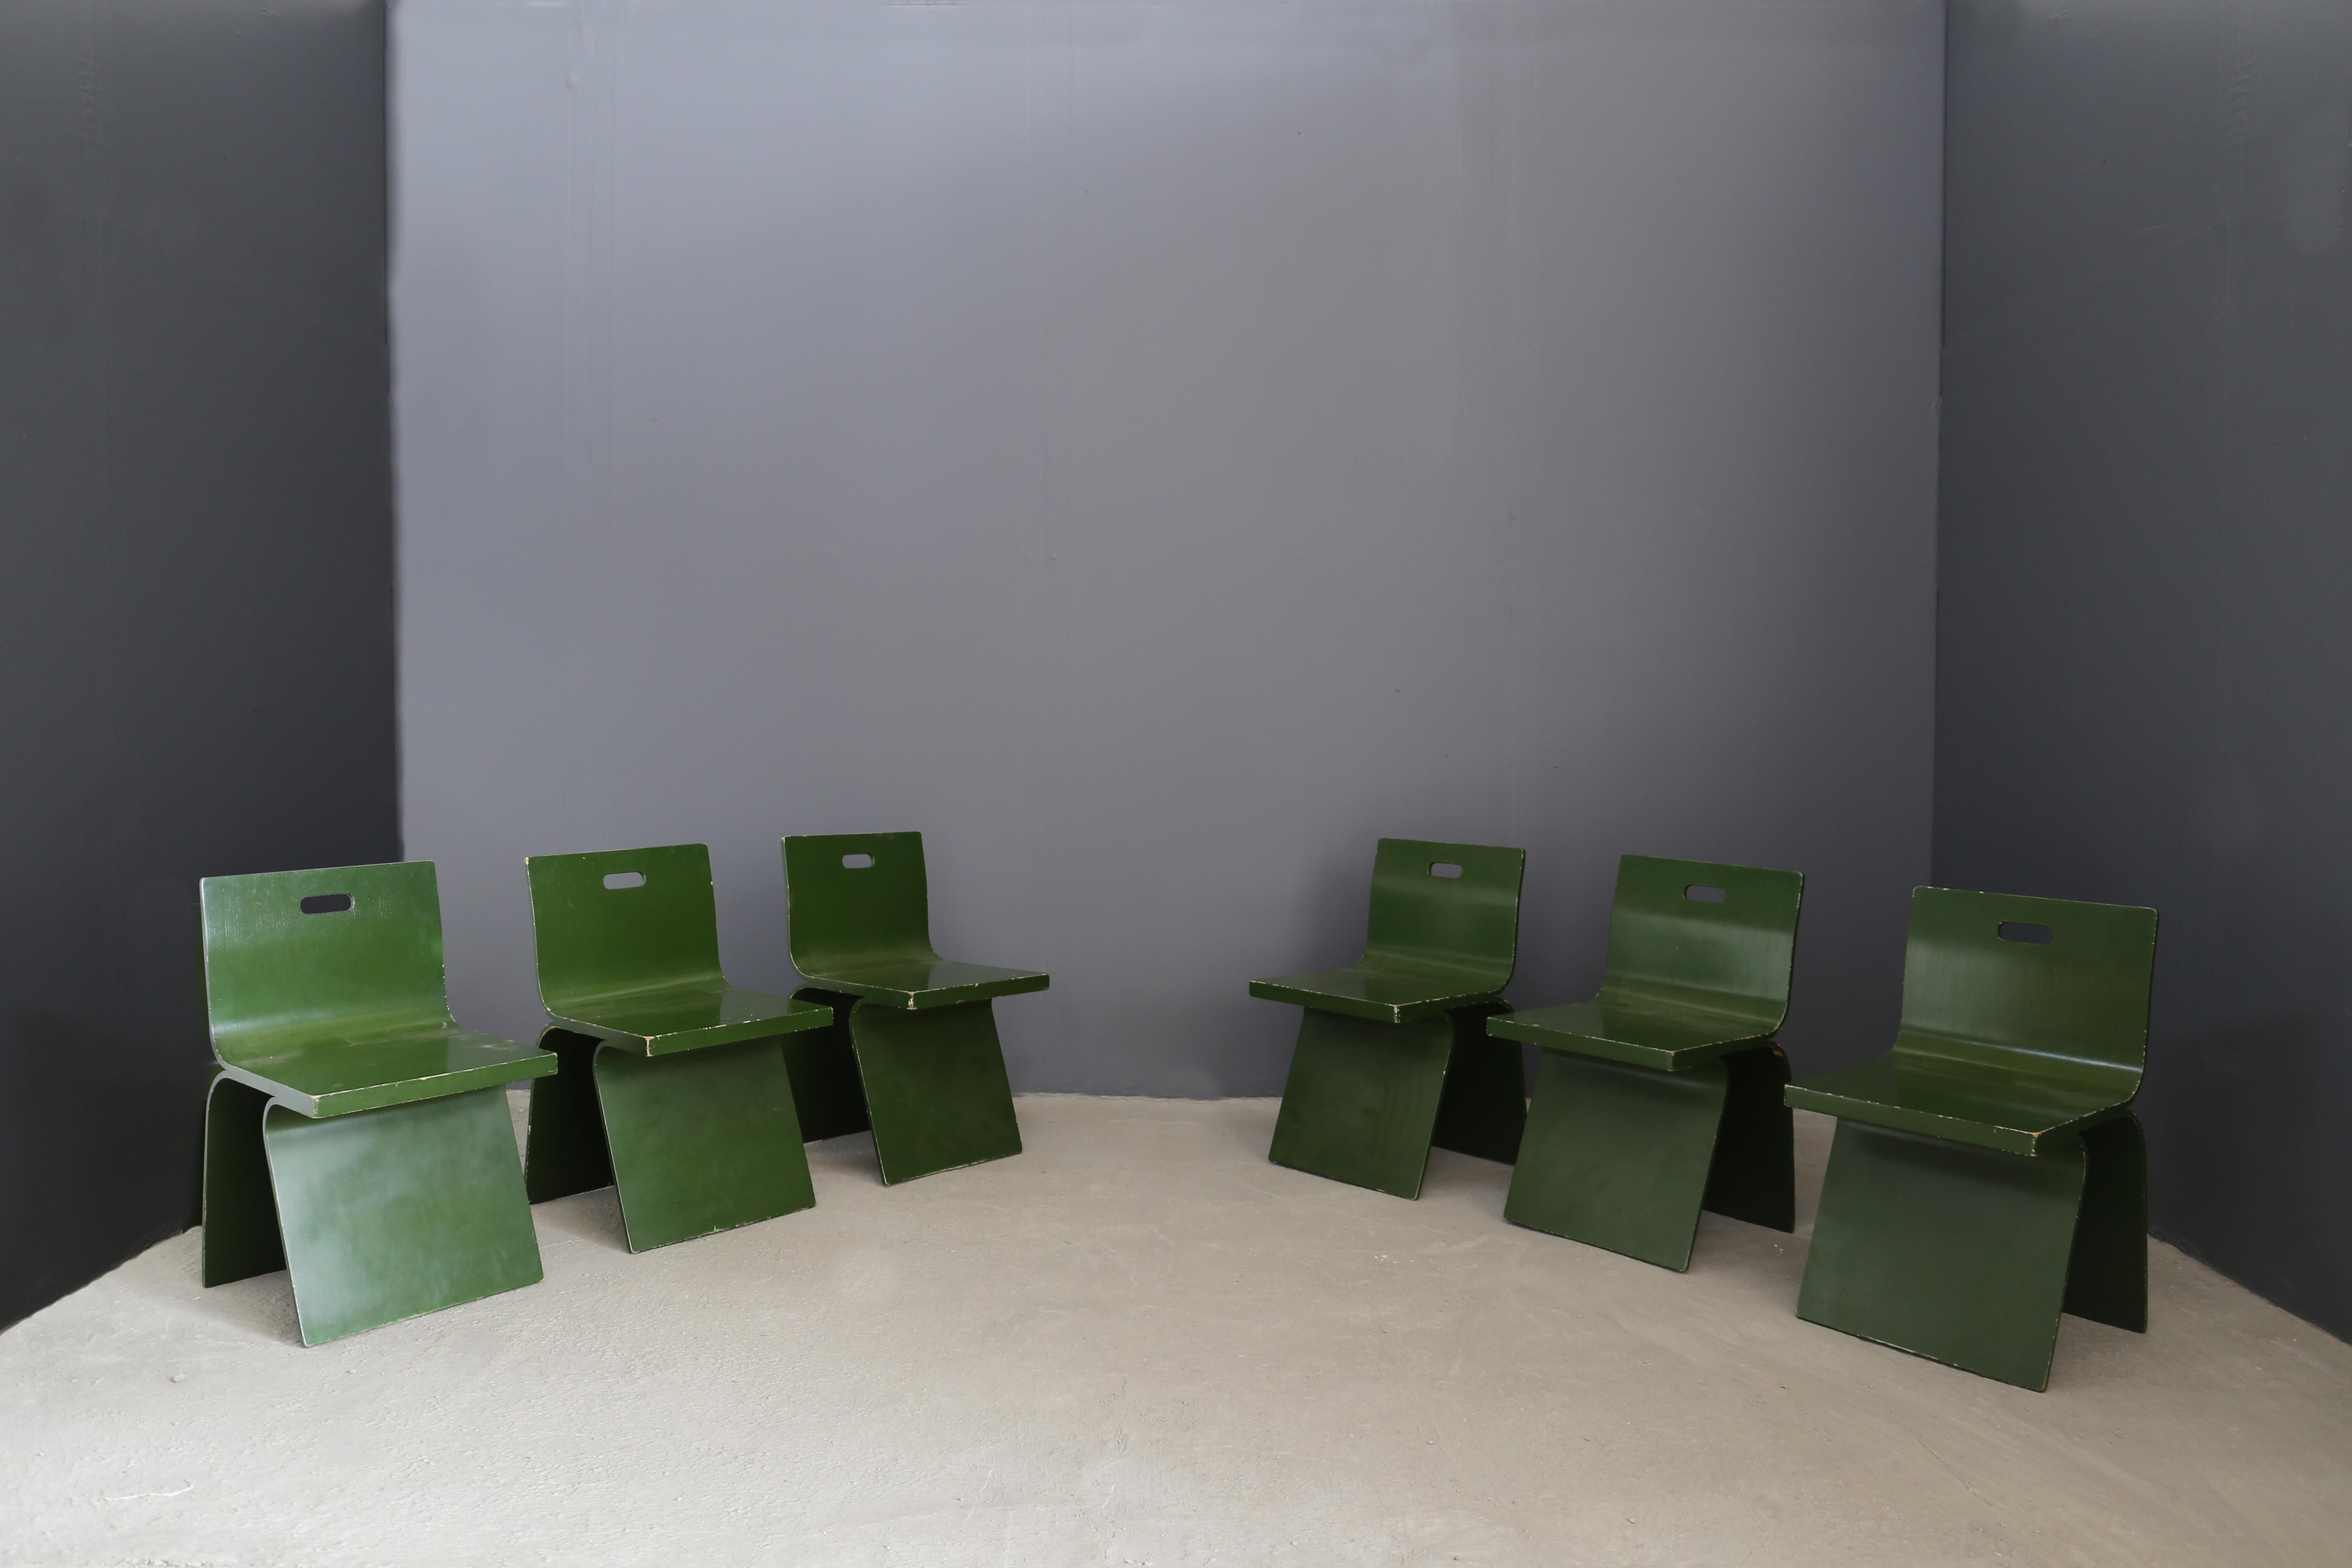 Set of 6 chairs by Gigi Sabadin from the late 1960s. The set is made of veneered wood. Noteworthy is its realization in very rare curved wood of green color. In the backrest there is a slit made of wood that acts as a slit handle to comfortably move